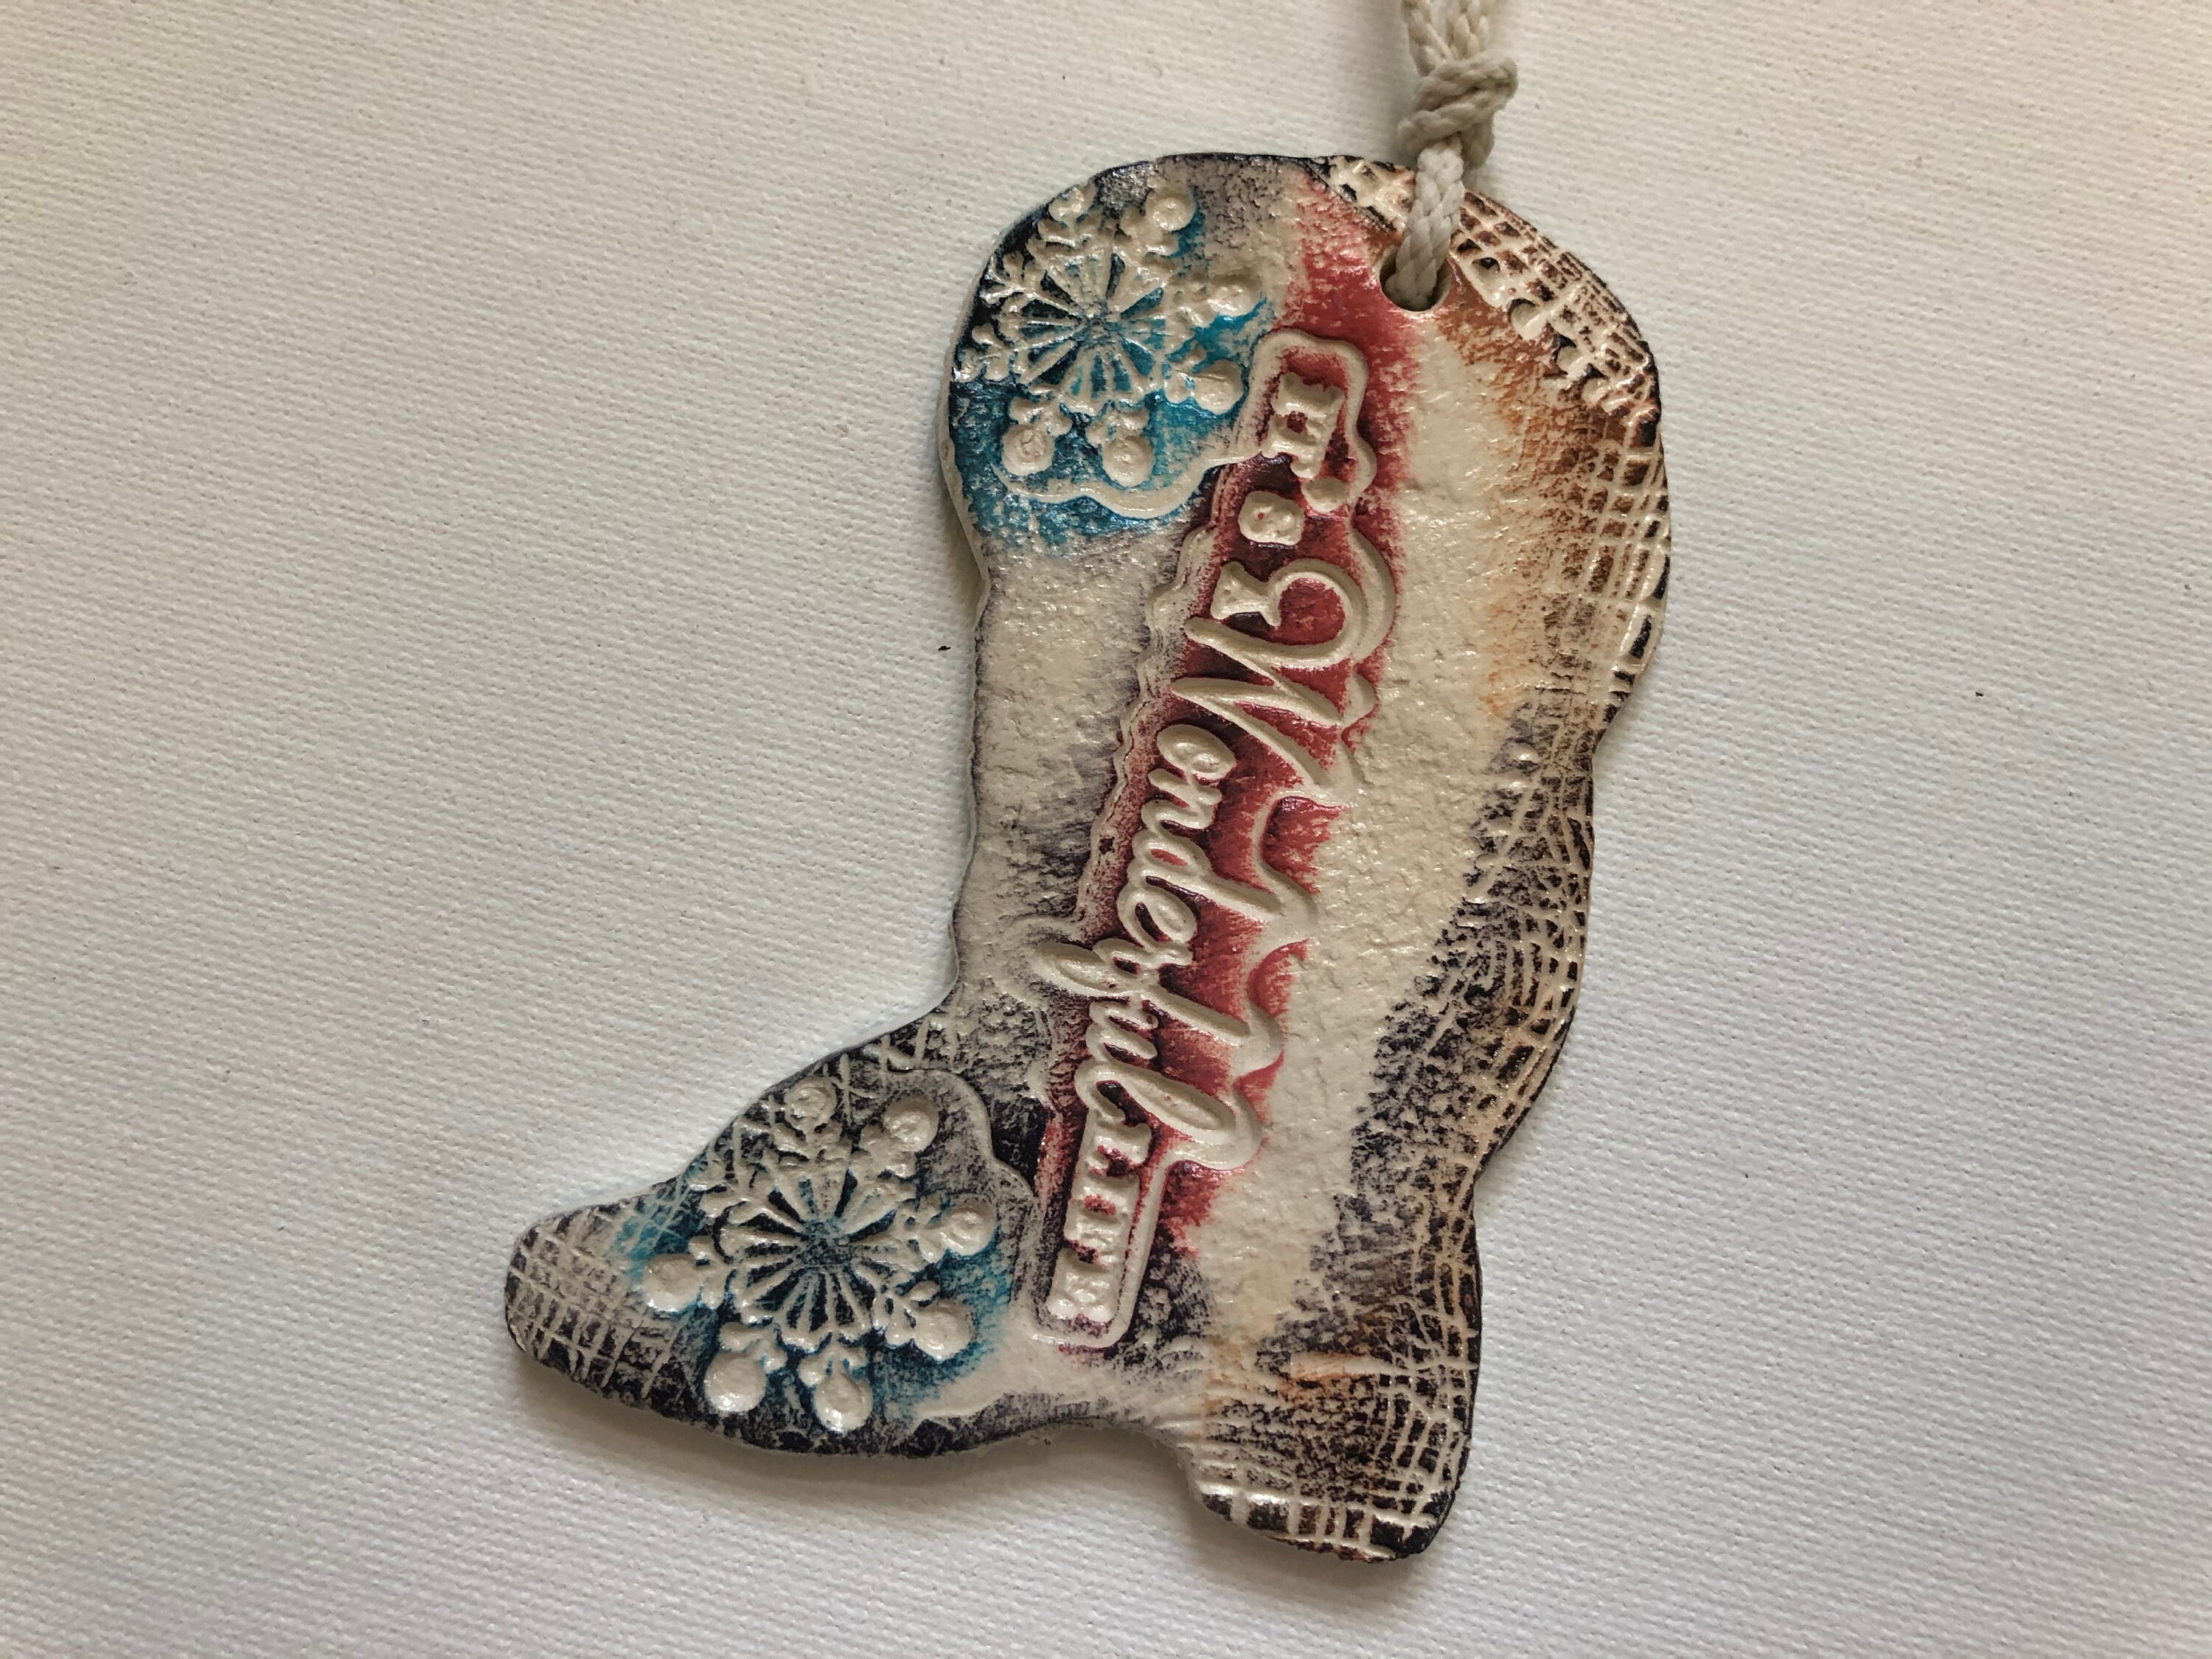 Texas Christmas Ornament with Boot & Merry Christmas Charms, LARGE – Duct  Tape and Denim